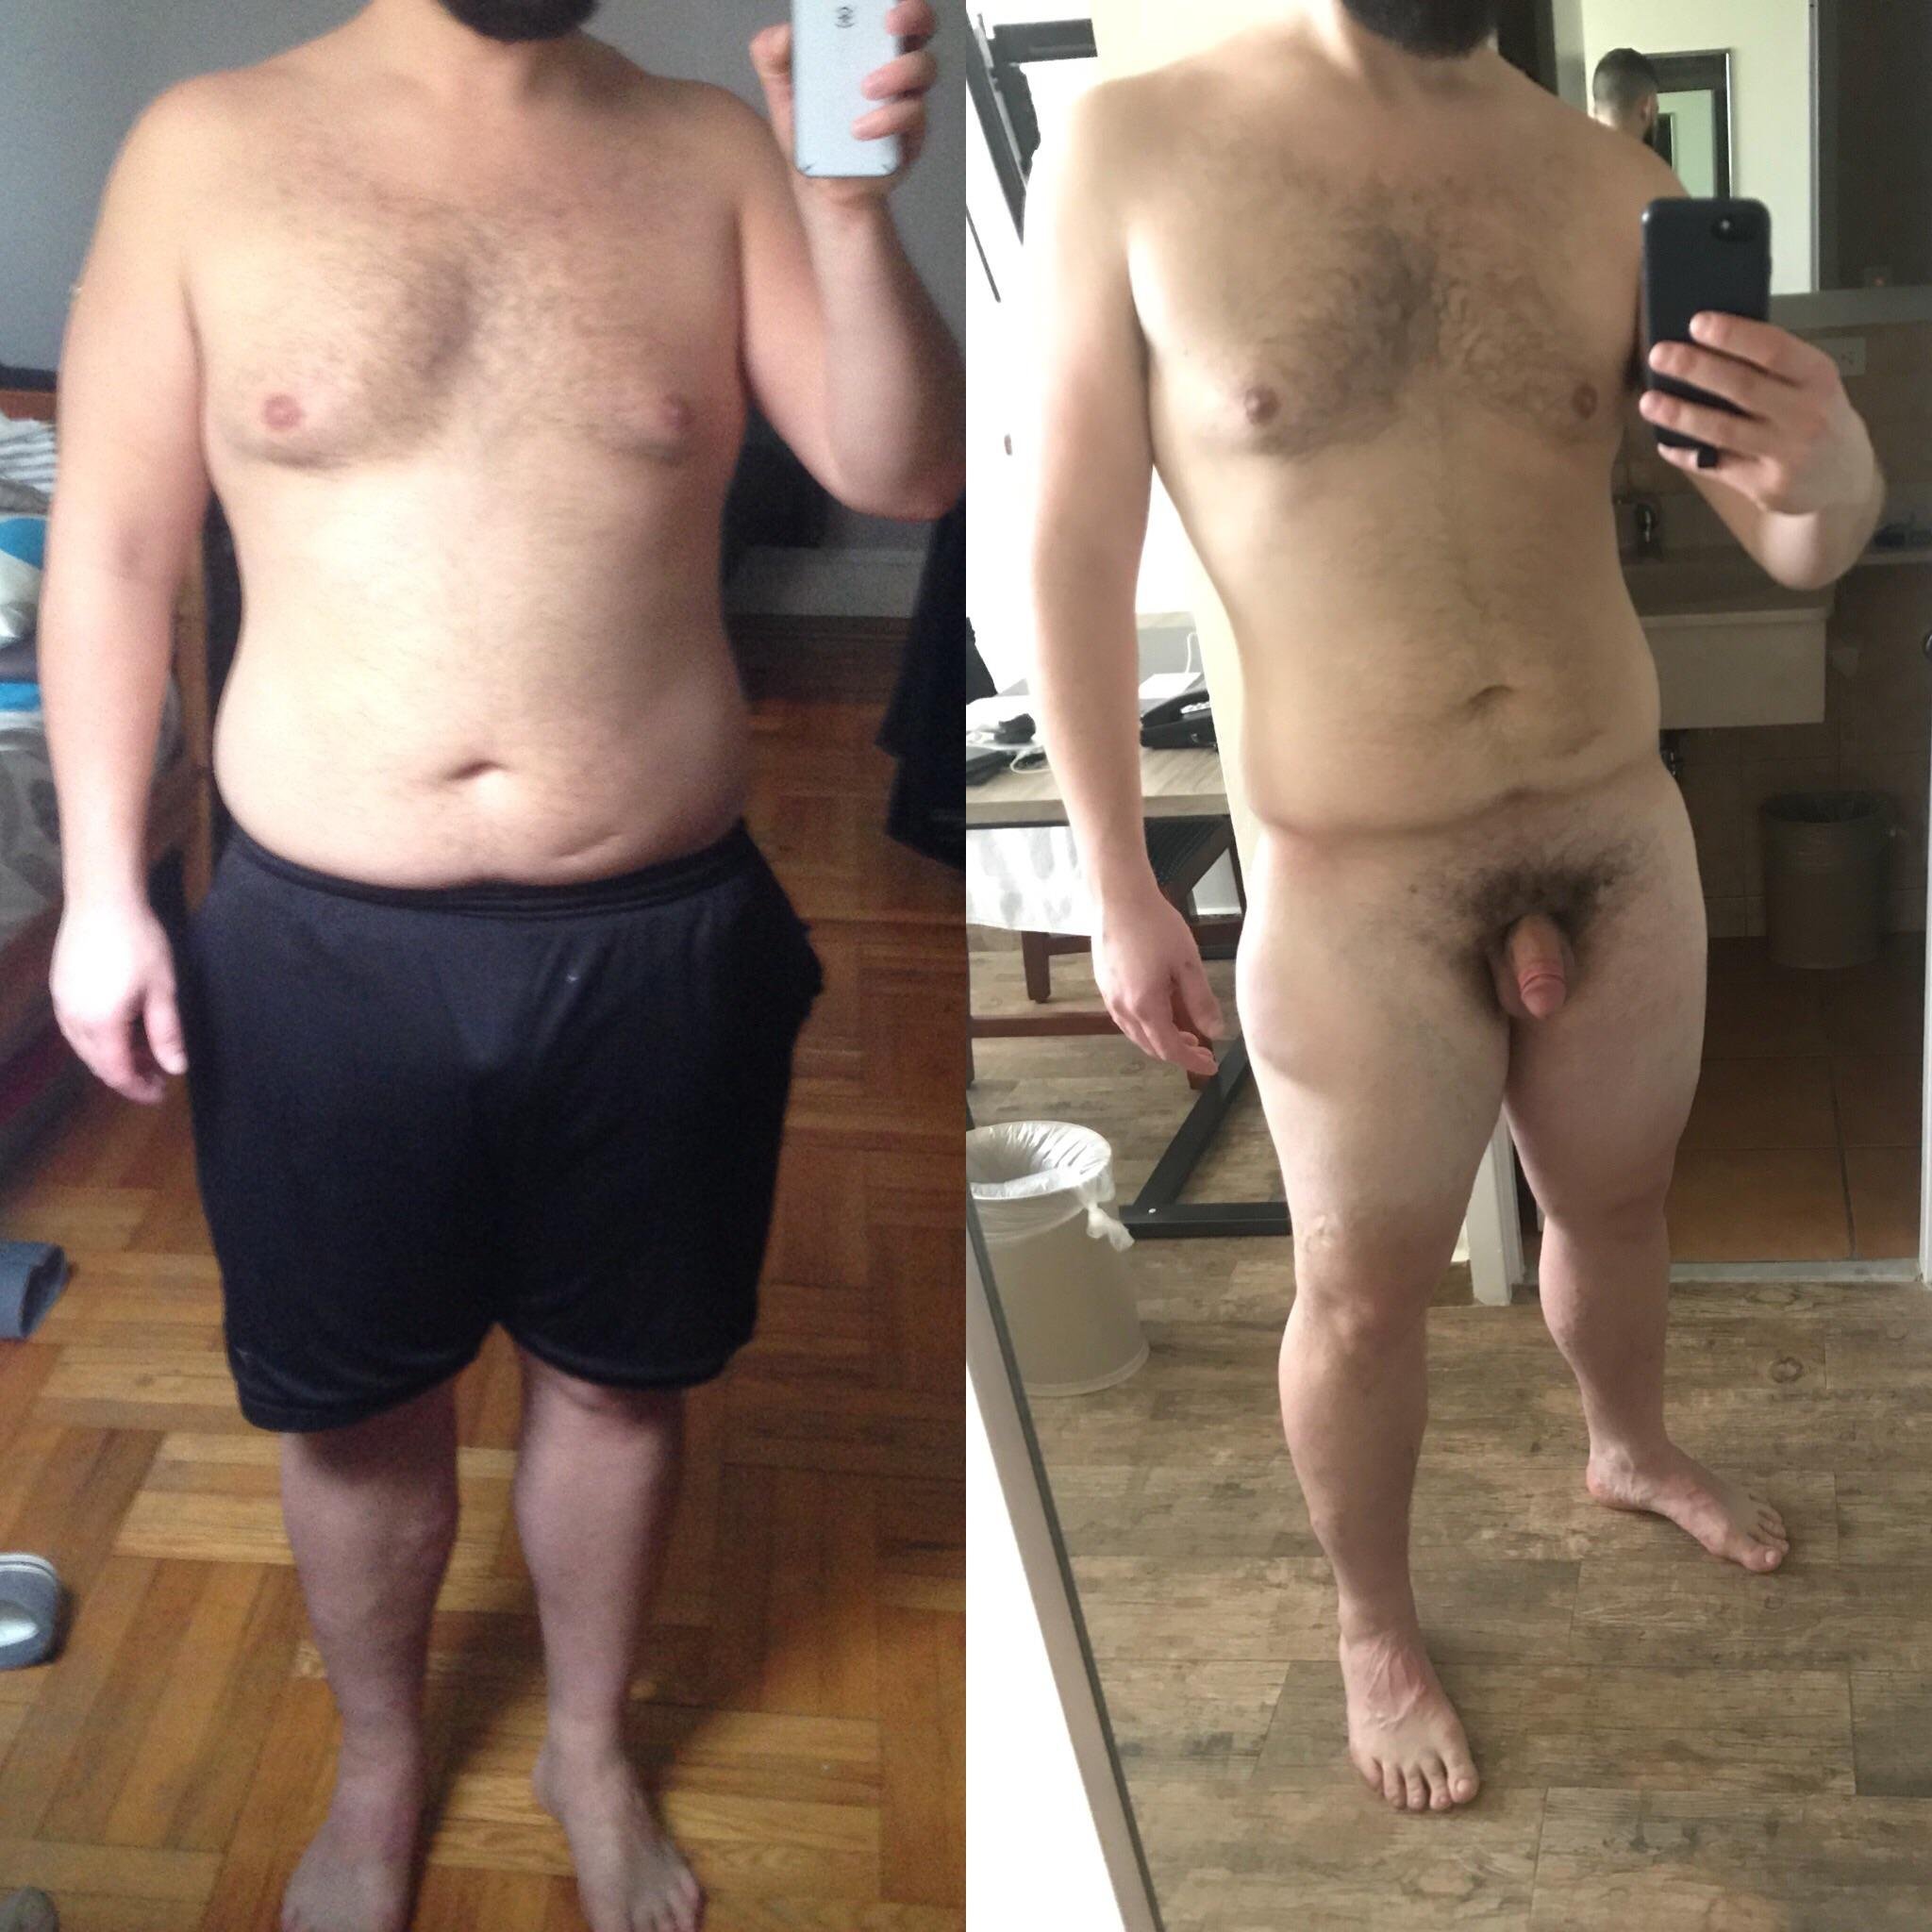 M/29/6’0” [248 &gt; 218 = 30 lbs | 1.25 years] I’m turning 30 in a few days and feeling better than ever. 15 more pounds to go before beach season!